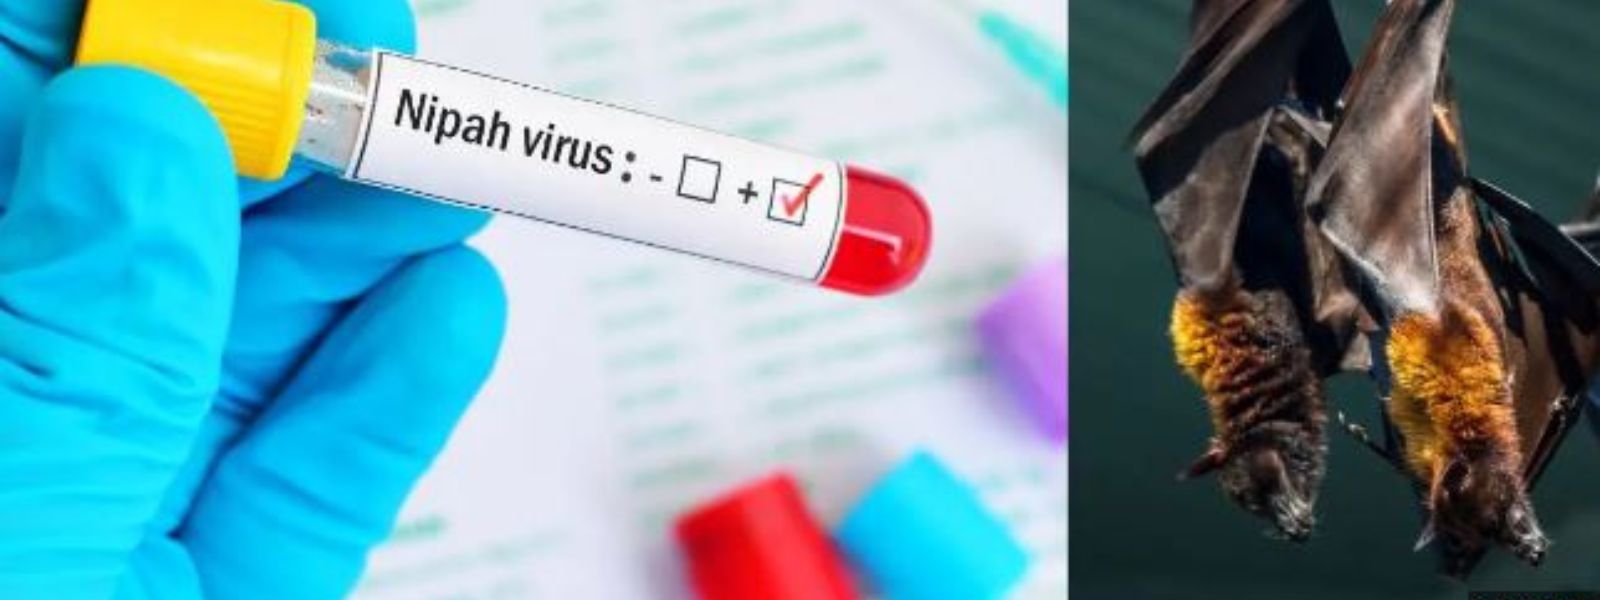 New case of Nipah virus discovered in Kerala